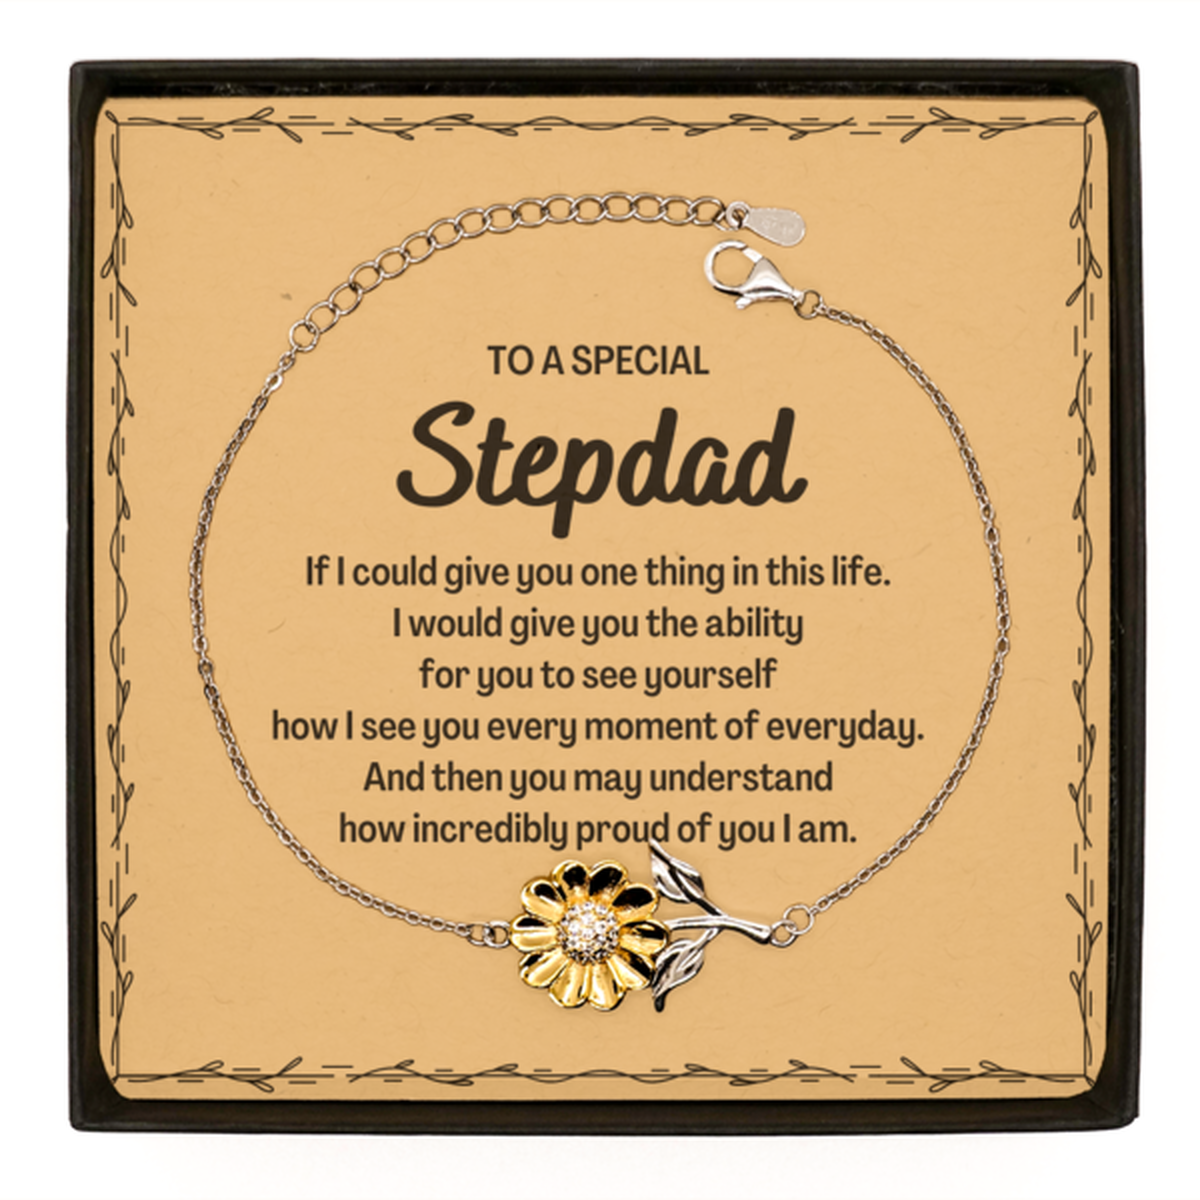 To My Stepdad Sunflower Bracelet, Gifts For Stepdad Message Card, Inspirational Gifts for Christmas Birthday, Epic Gifts for Stepdad To A Special Stepdad how incredibly proud of you I am